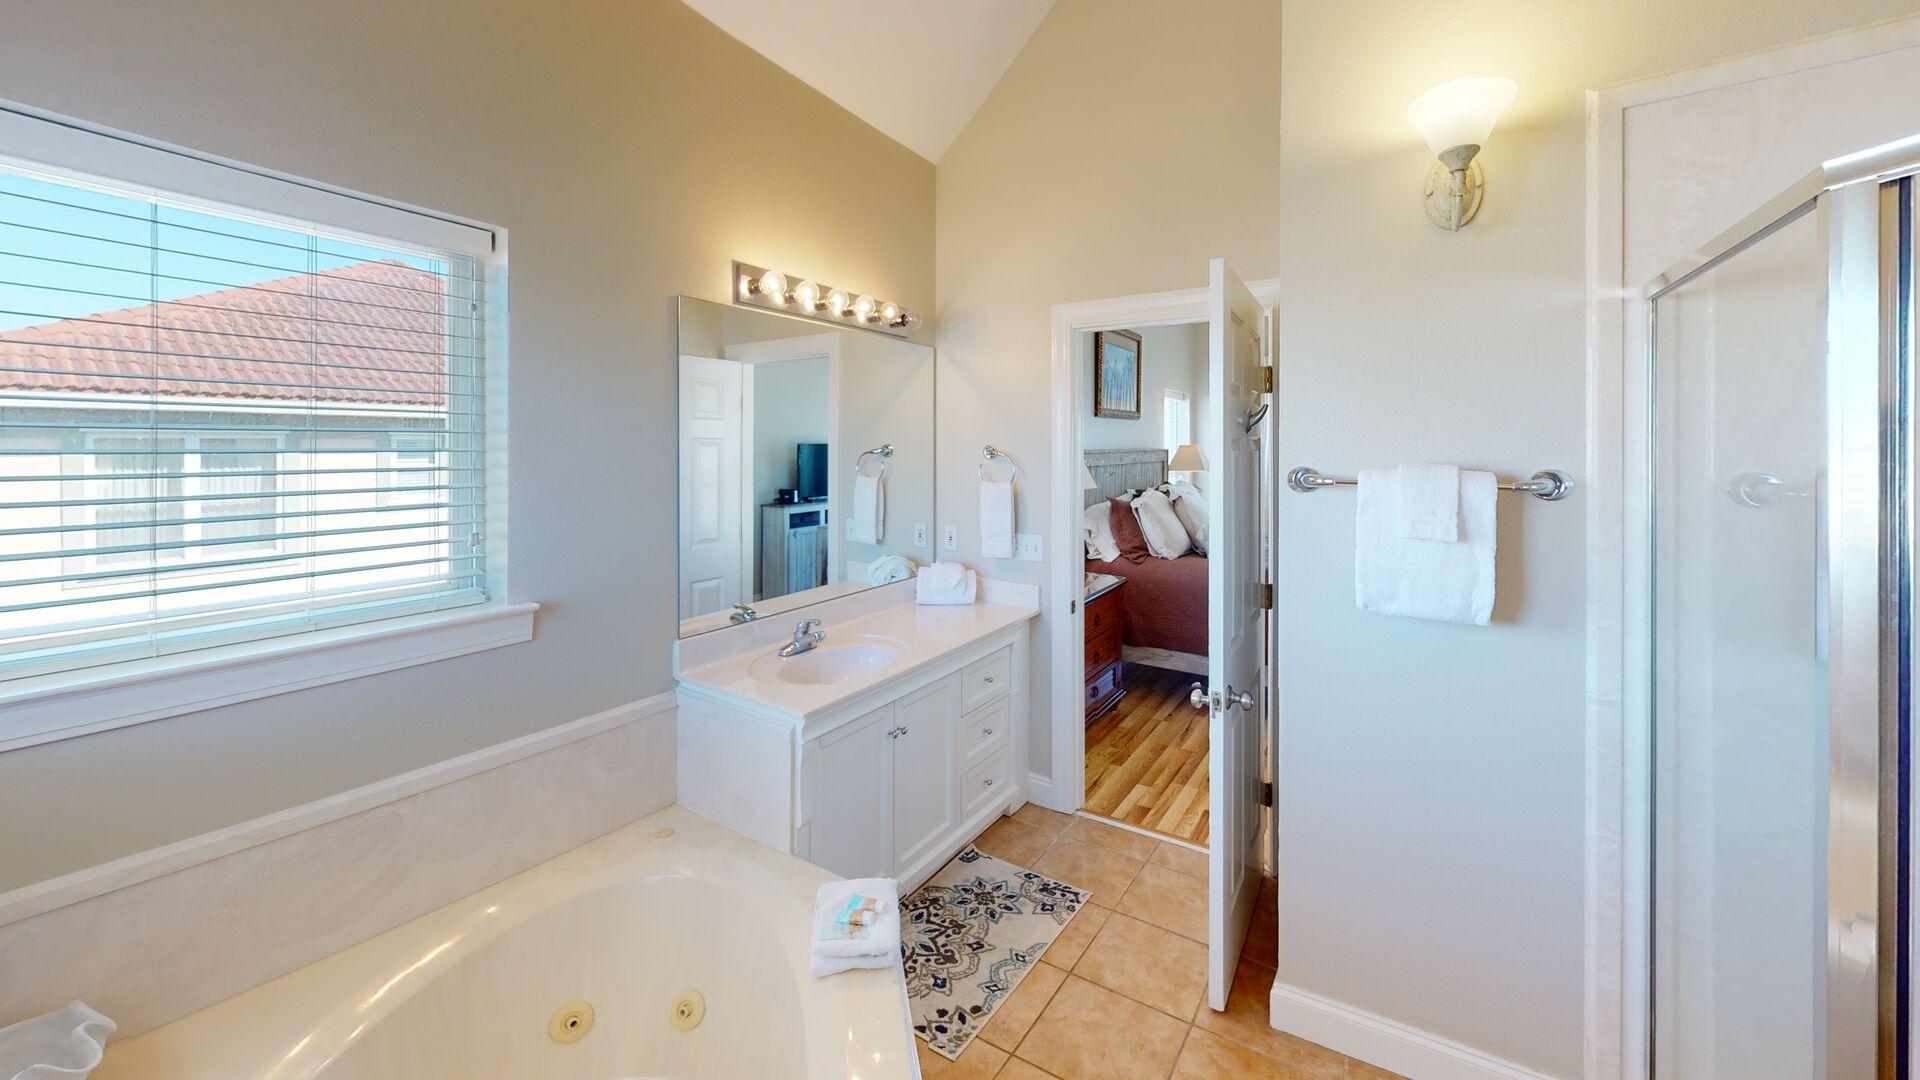 Private Master Bathroom with a walk-in shower